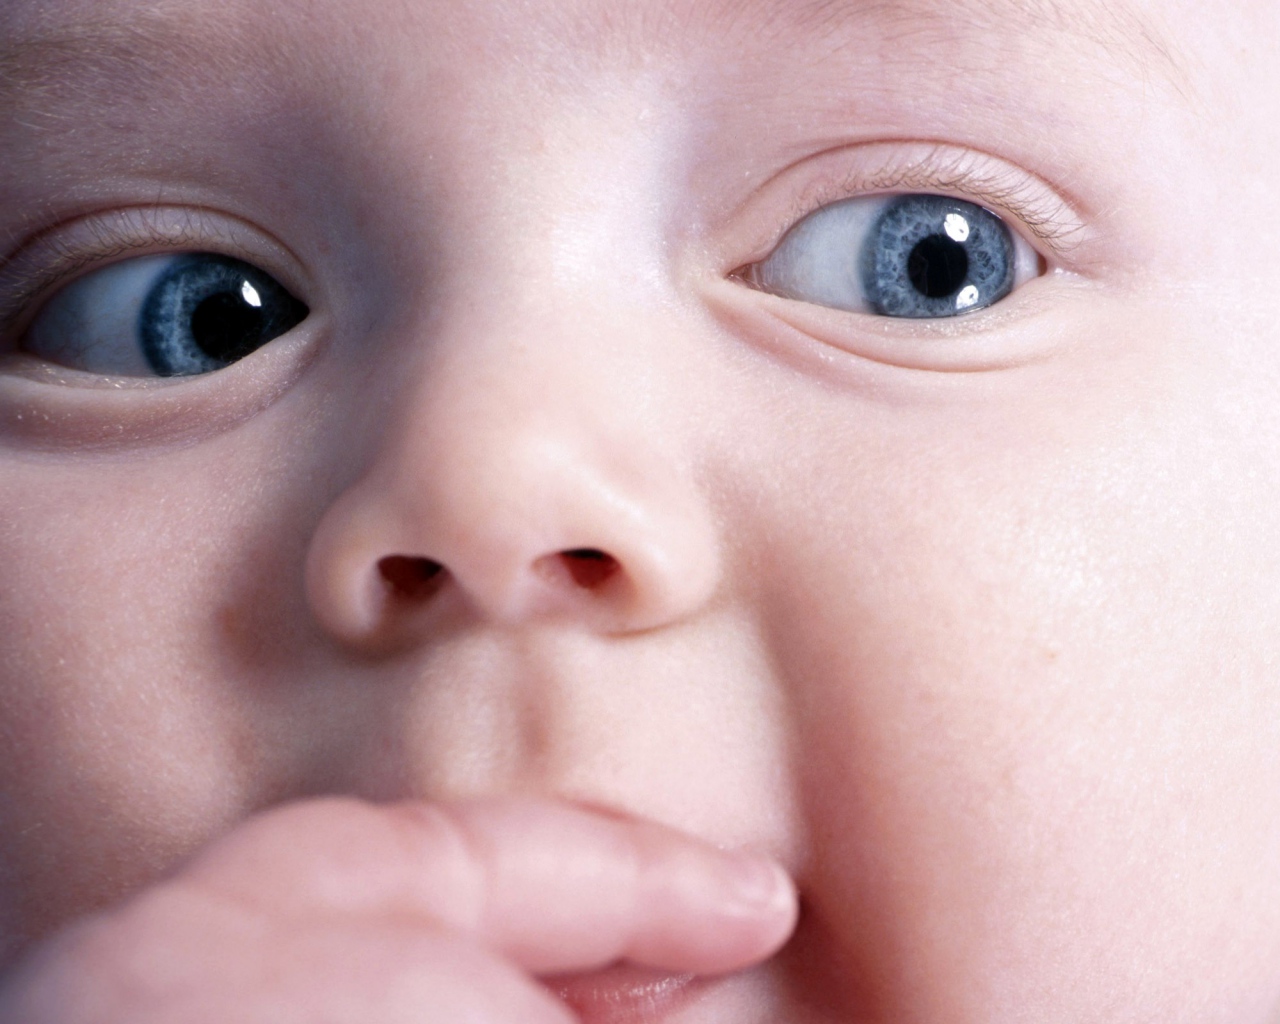 Download Wallpaper 1280x1024 Child, Baby, Face, Close-up, Blue ...